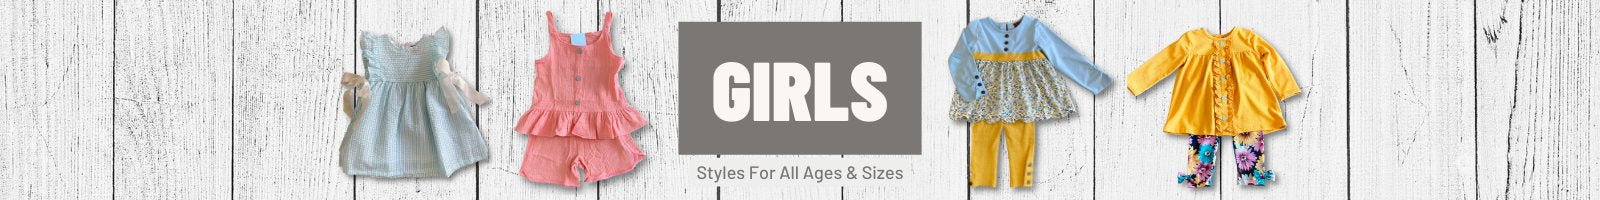 Girls Collection Banner, For Girls of All Ages & Sizes